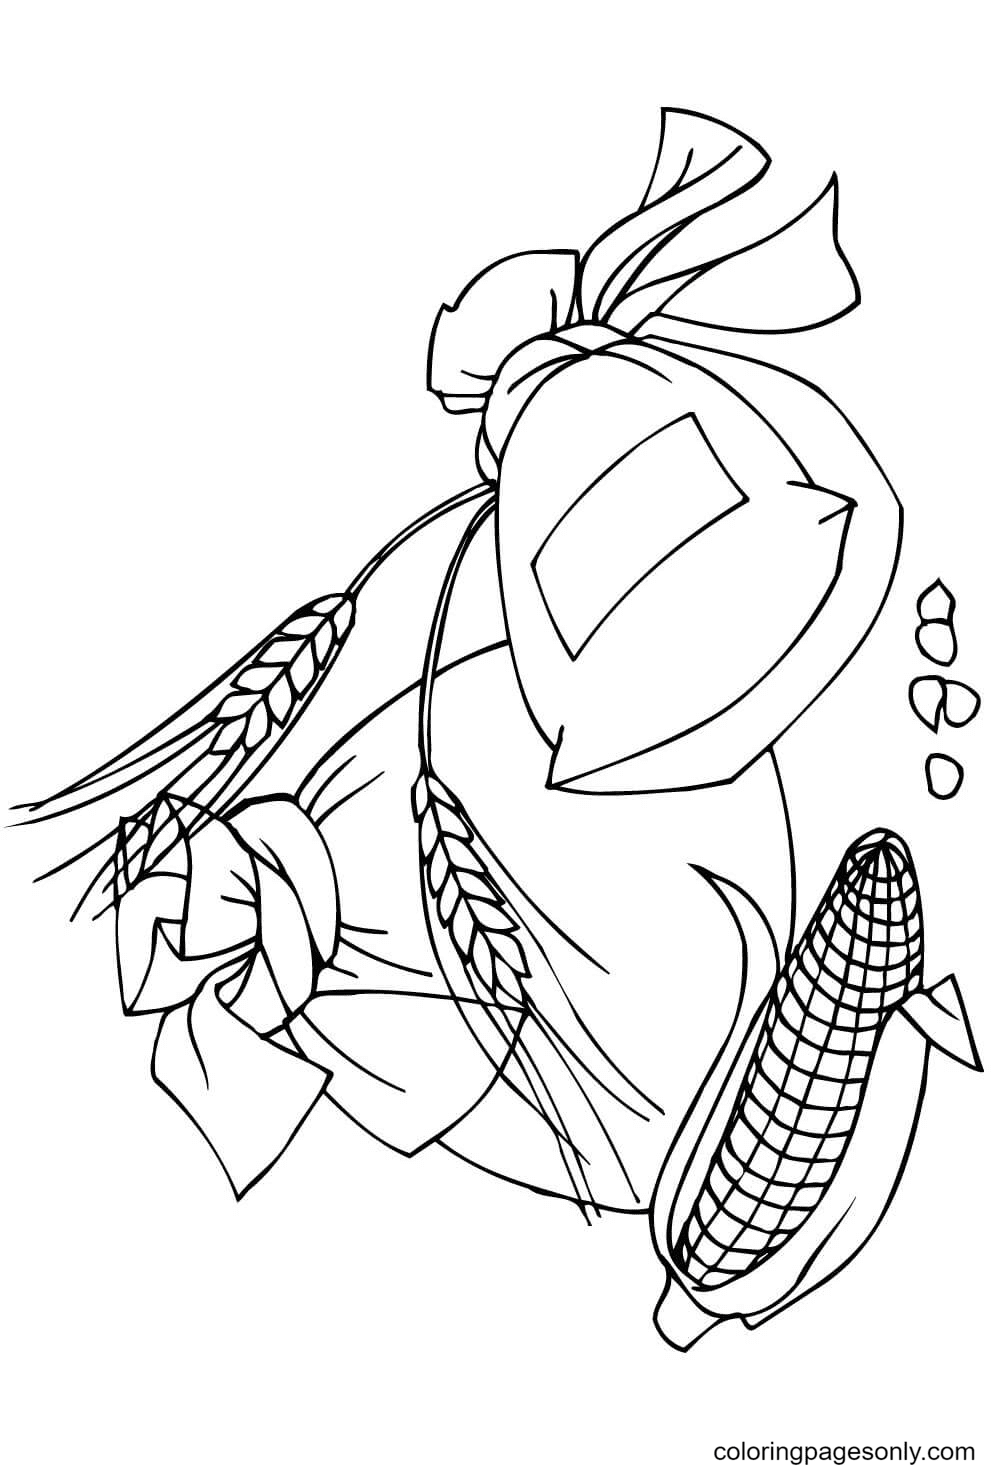 Spikelets Corncob and Flour Bags Coloring Page